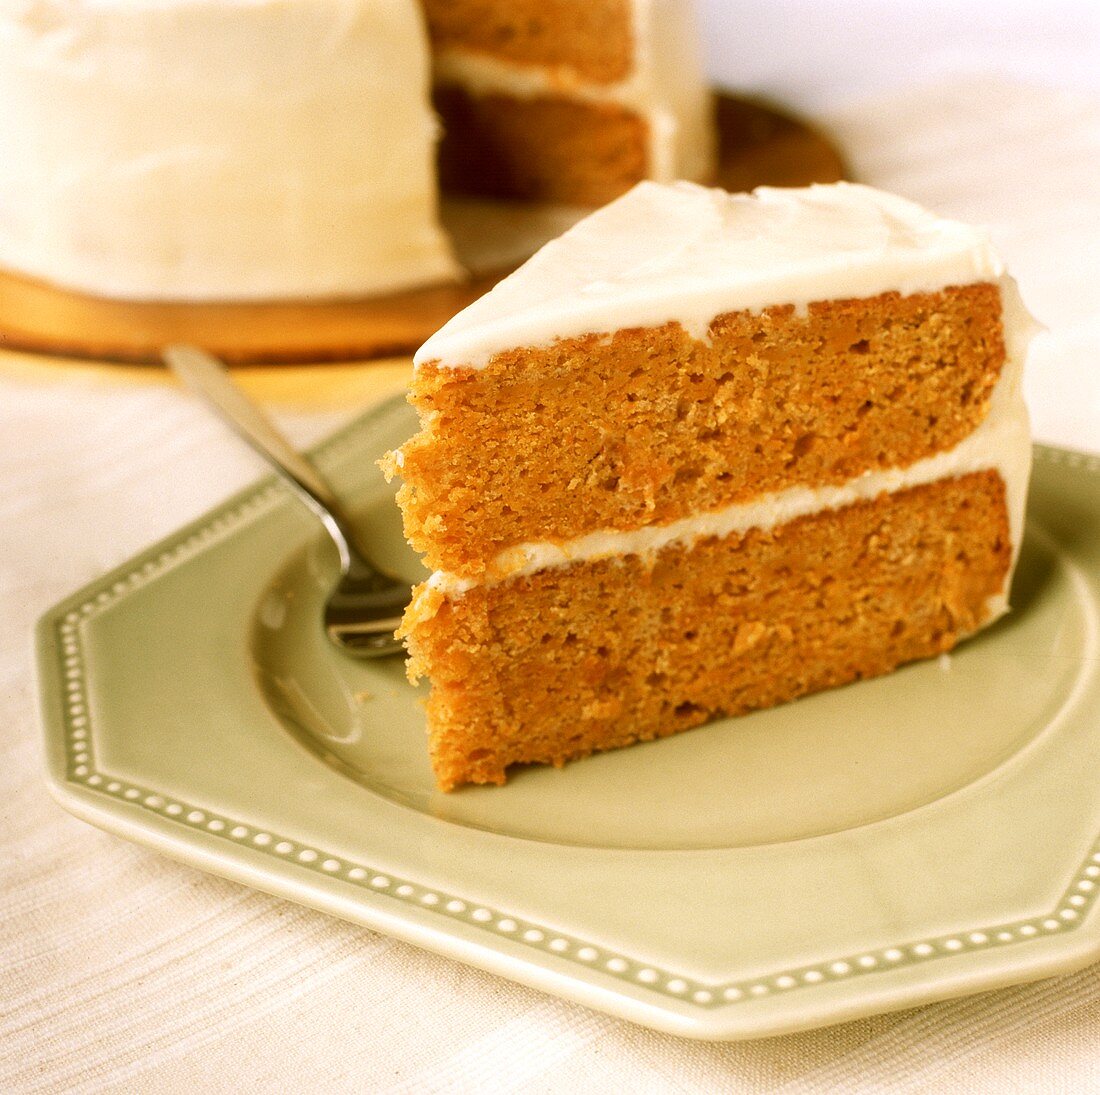 Slice of Double Layer Carrot Cake